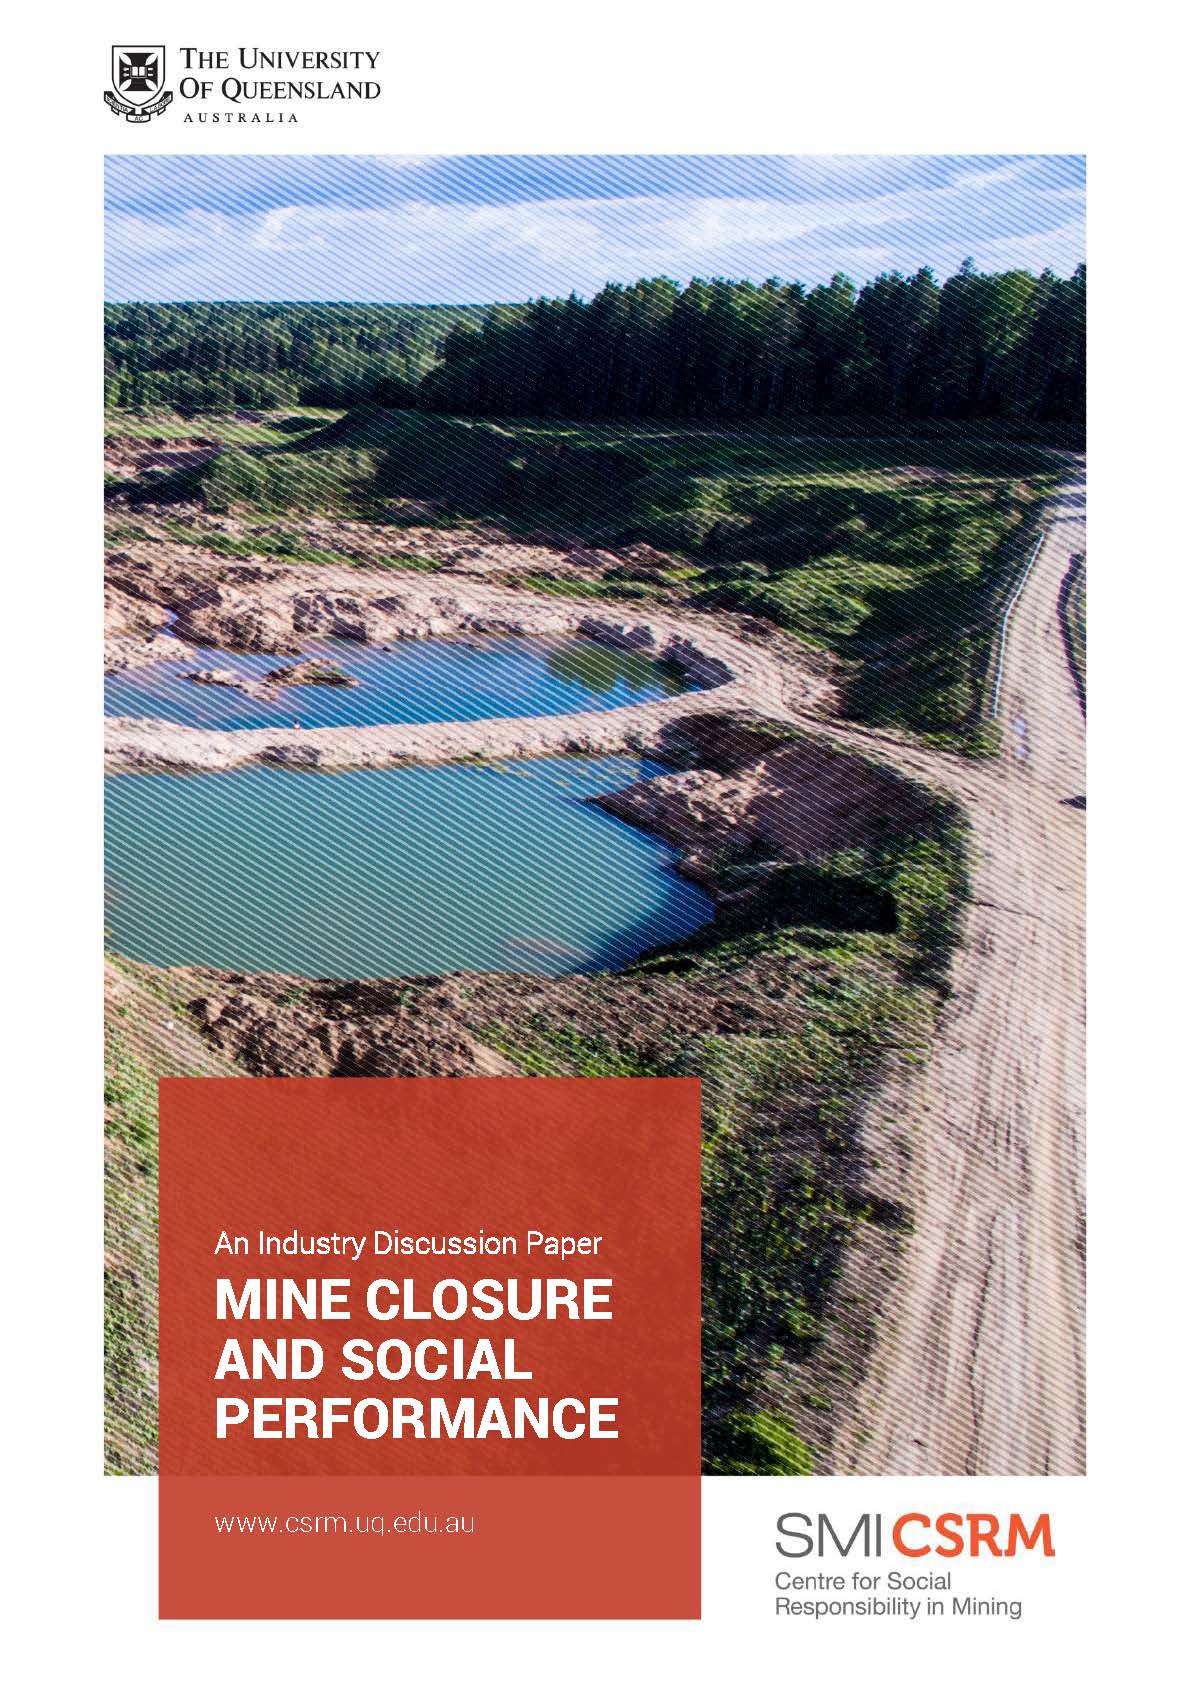 Mine closure and social performance